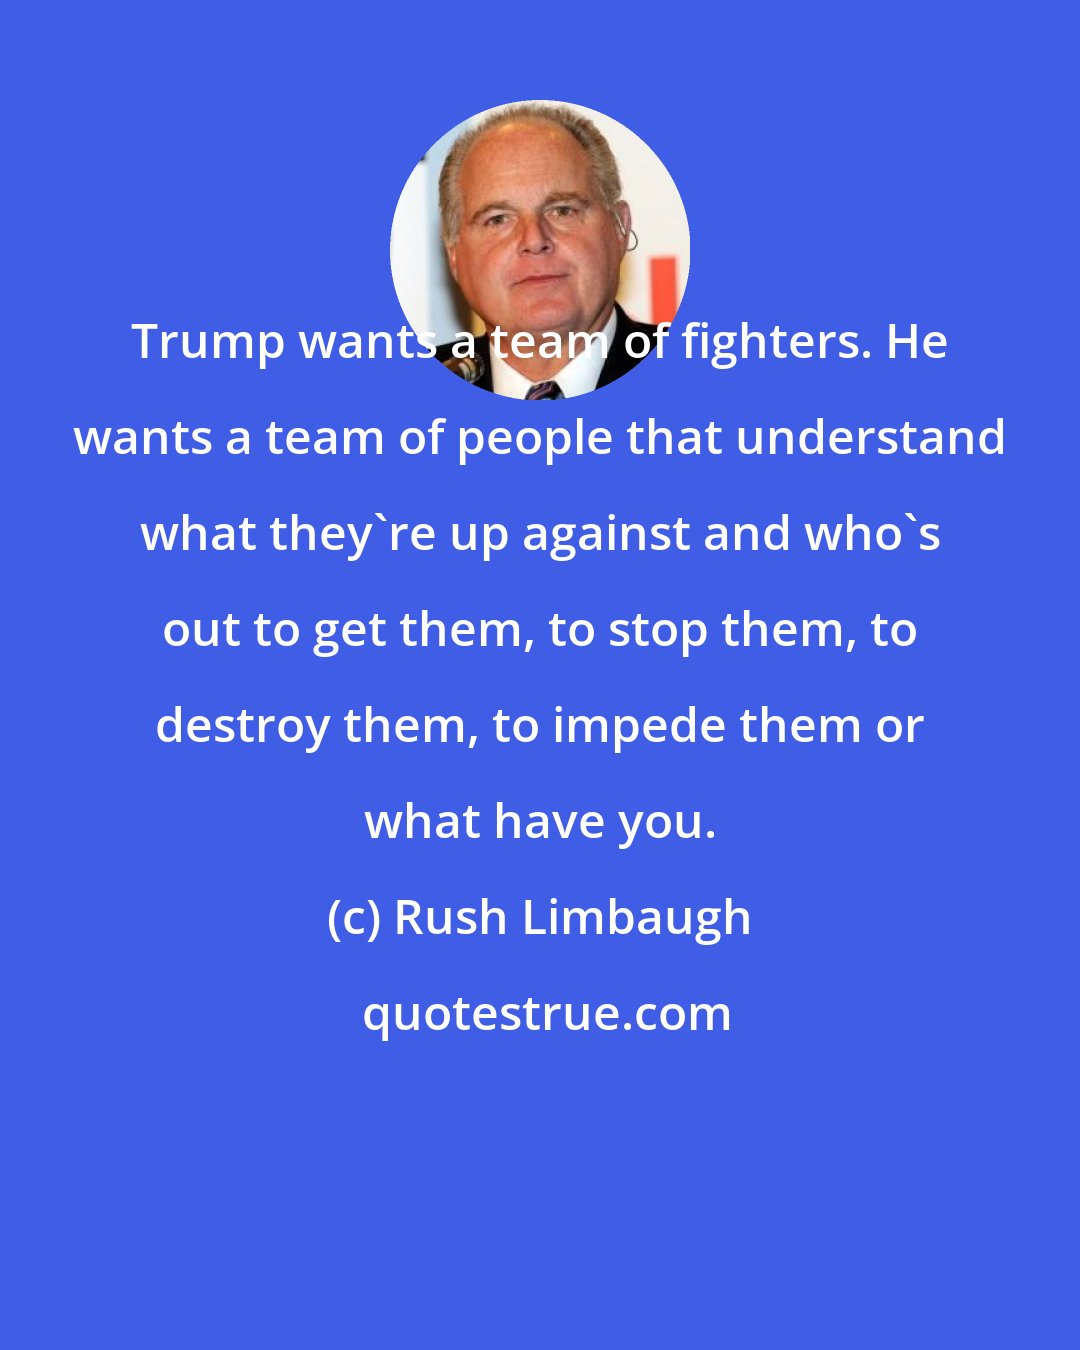 Rush Limbaugh: Trump wants a team of fighters. He wants a team of people that understand what they're up against and who's out to get them, to stop them, to destroy them, to impede them or what have you.